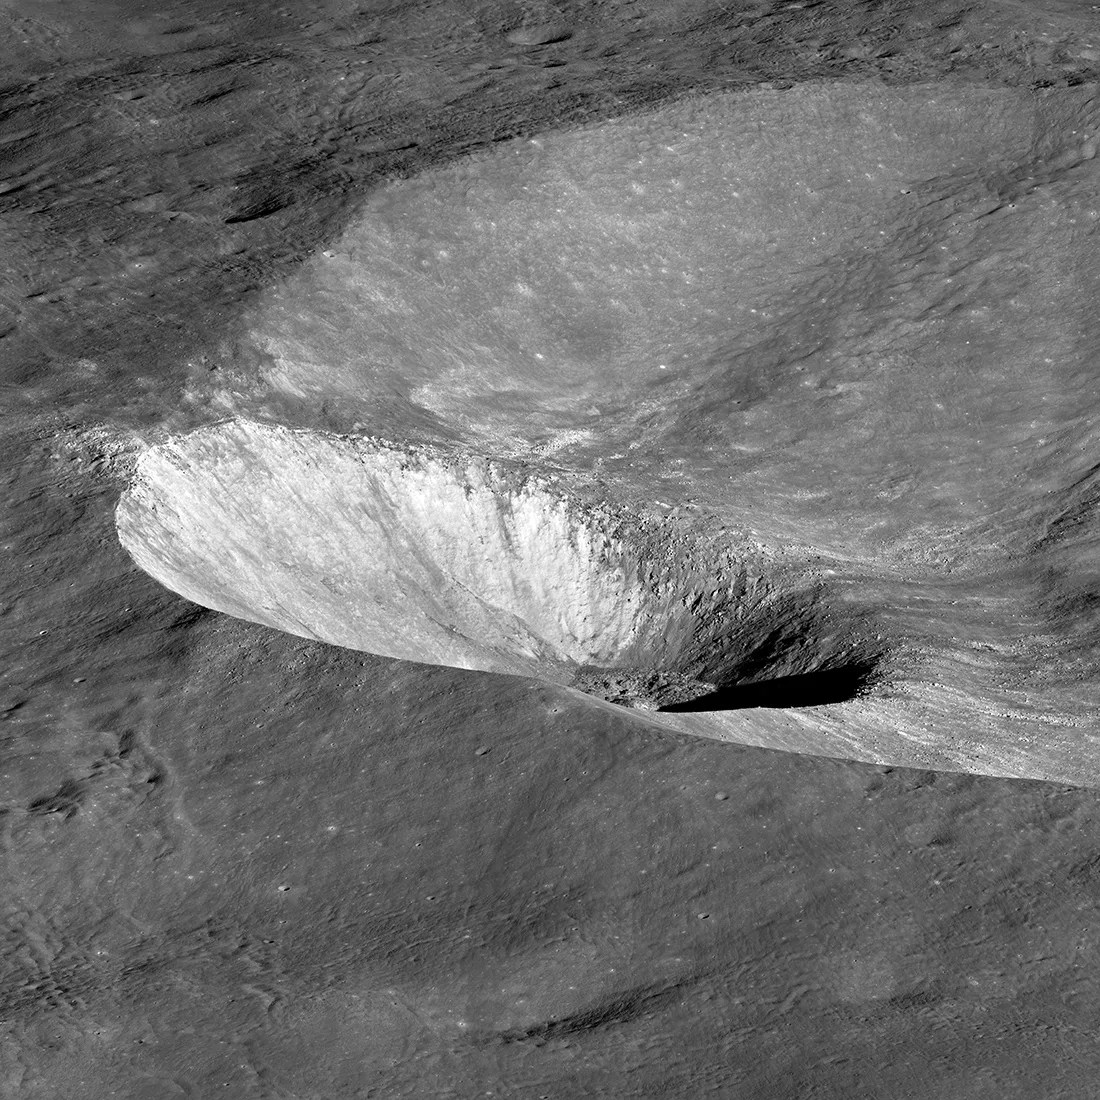 crater within a crater